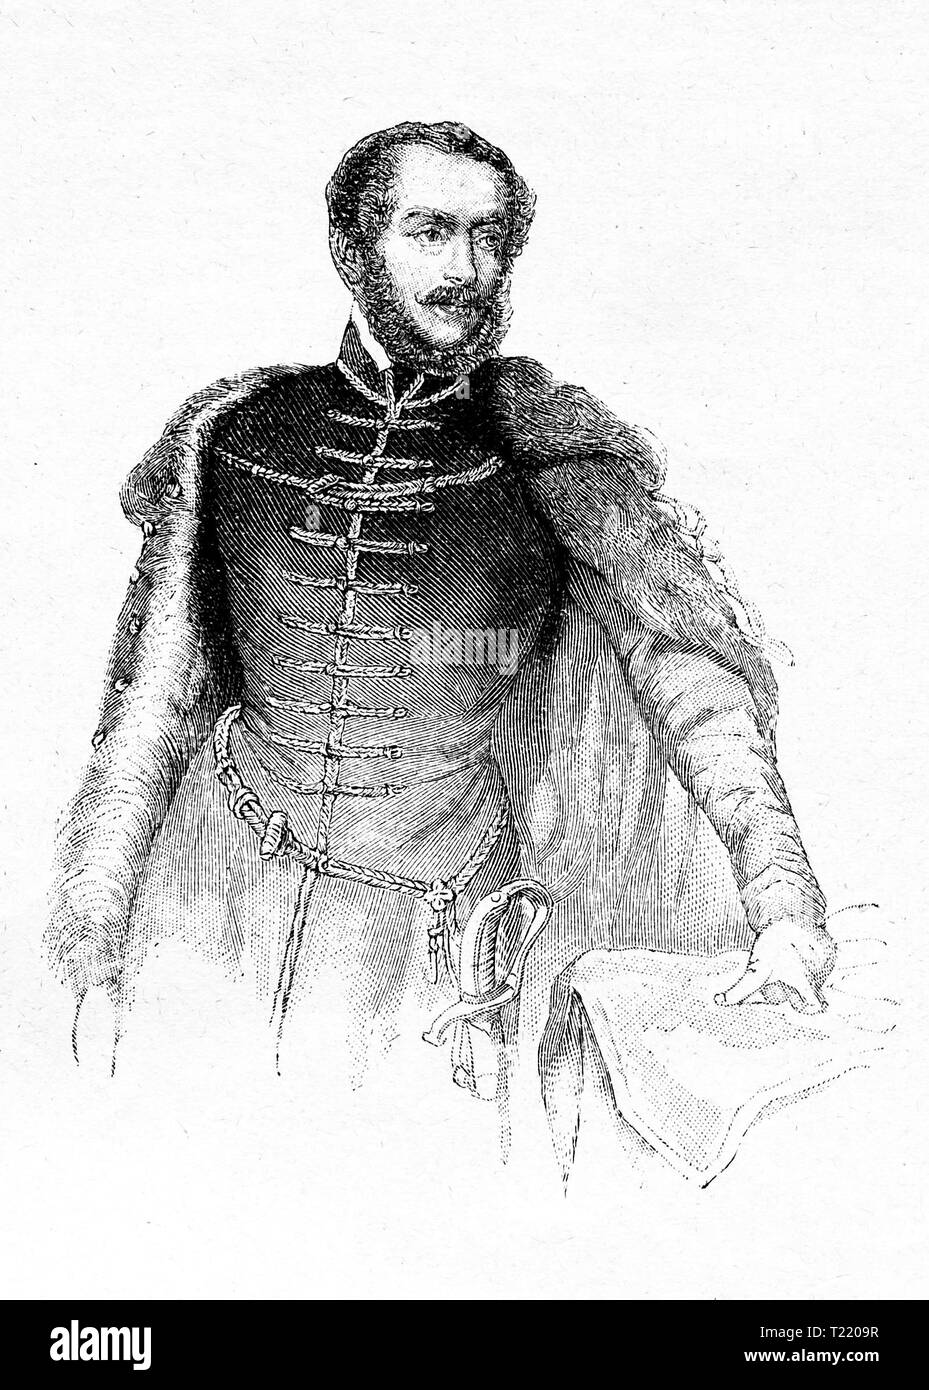 Lajos Kossuth, Hungarian nobleman, lawyer, journalist, painting  by Kurovsky. Digital improved reproduction from Illustrated overview of the life of mankind in the 19th century, 1901 edition, Marx publishing house, St. Petersburg. Stock Photo